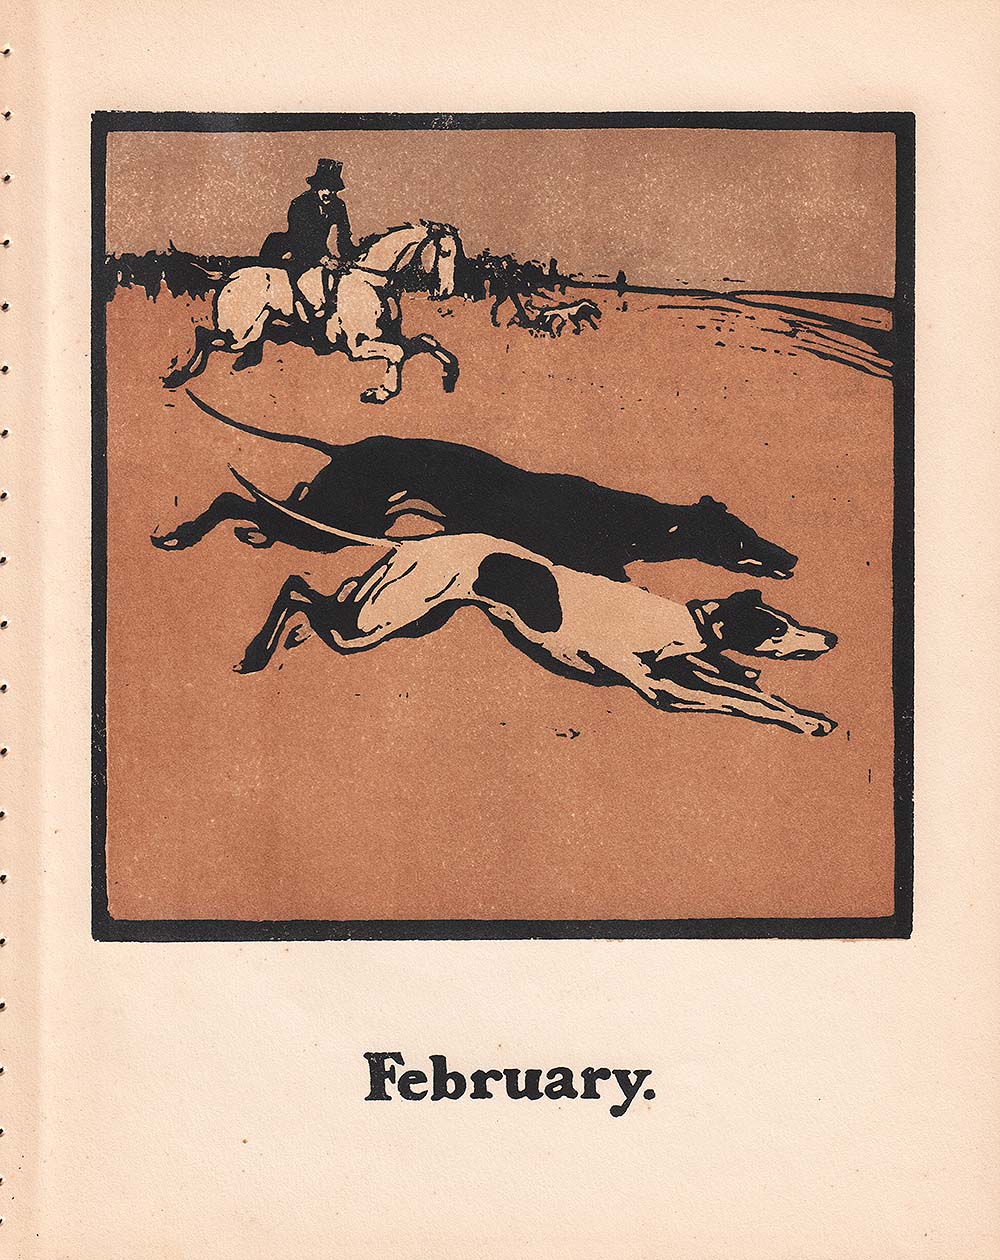 February - Coursing.